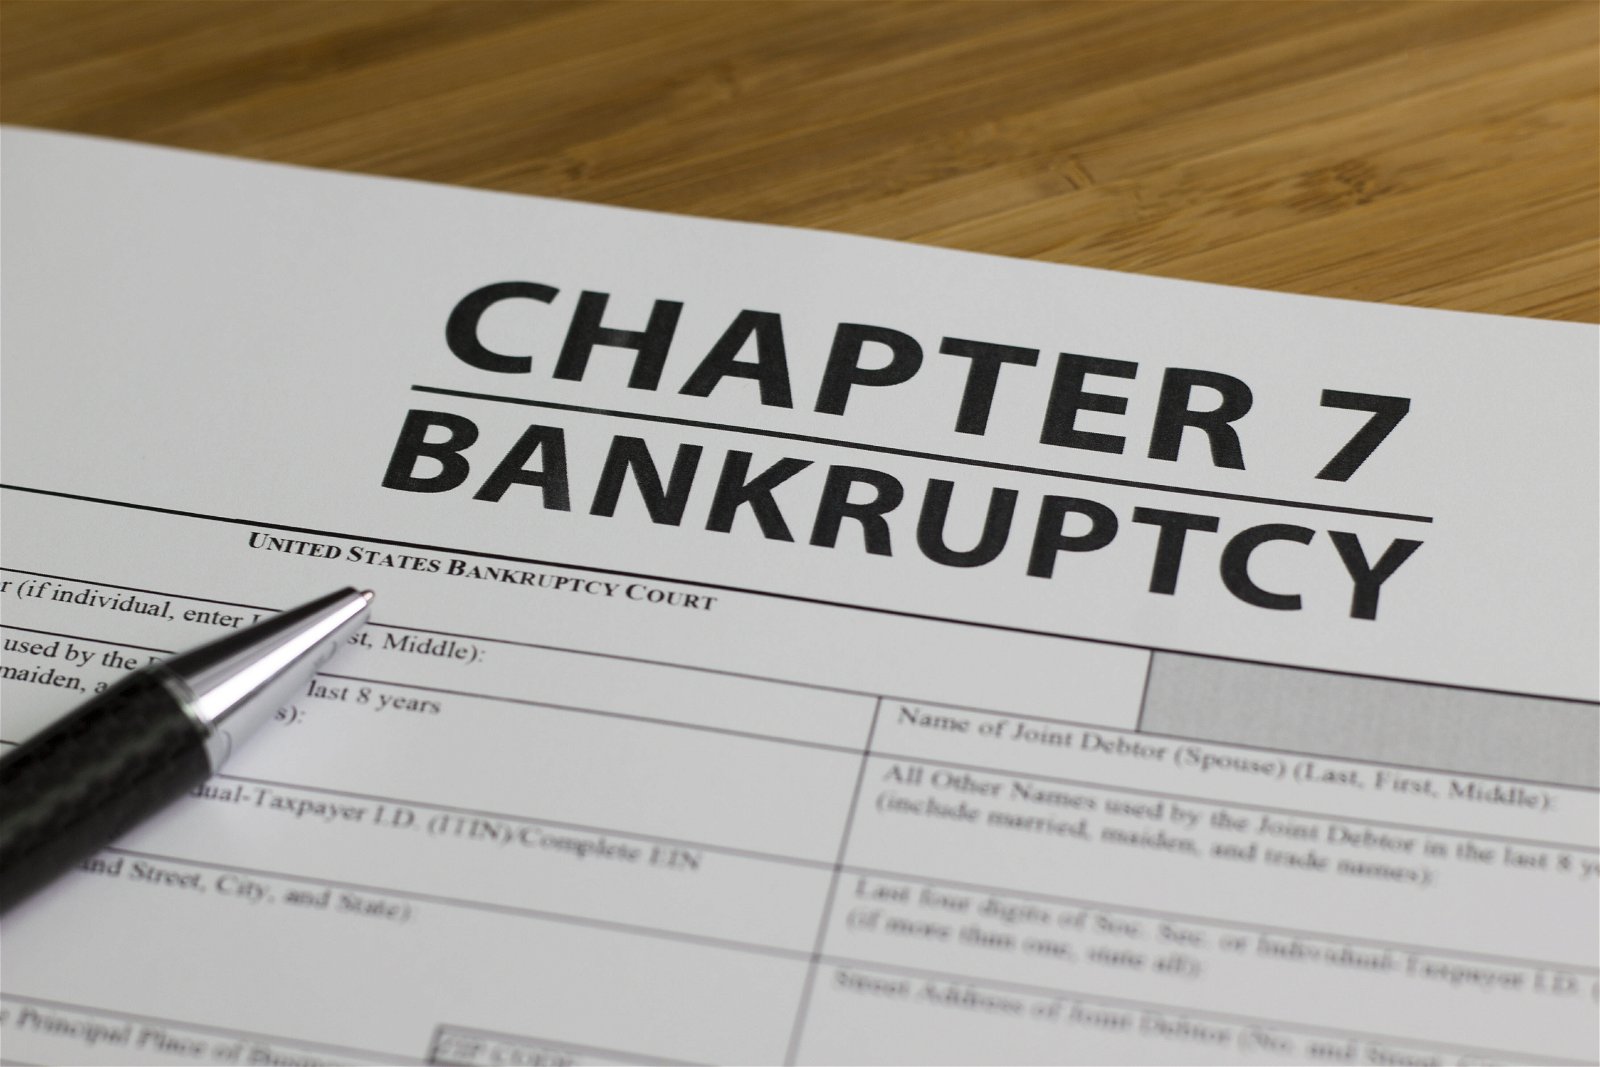 Chapter Bankruptcy 7 Lawyer